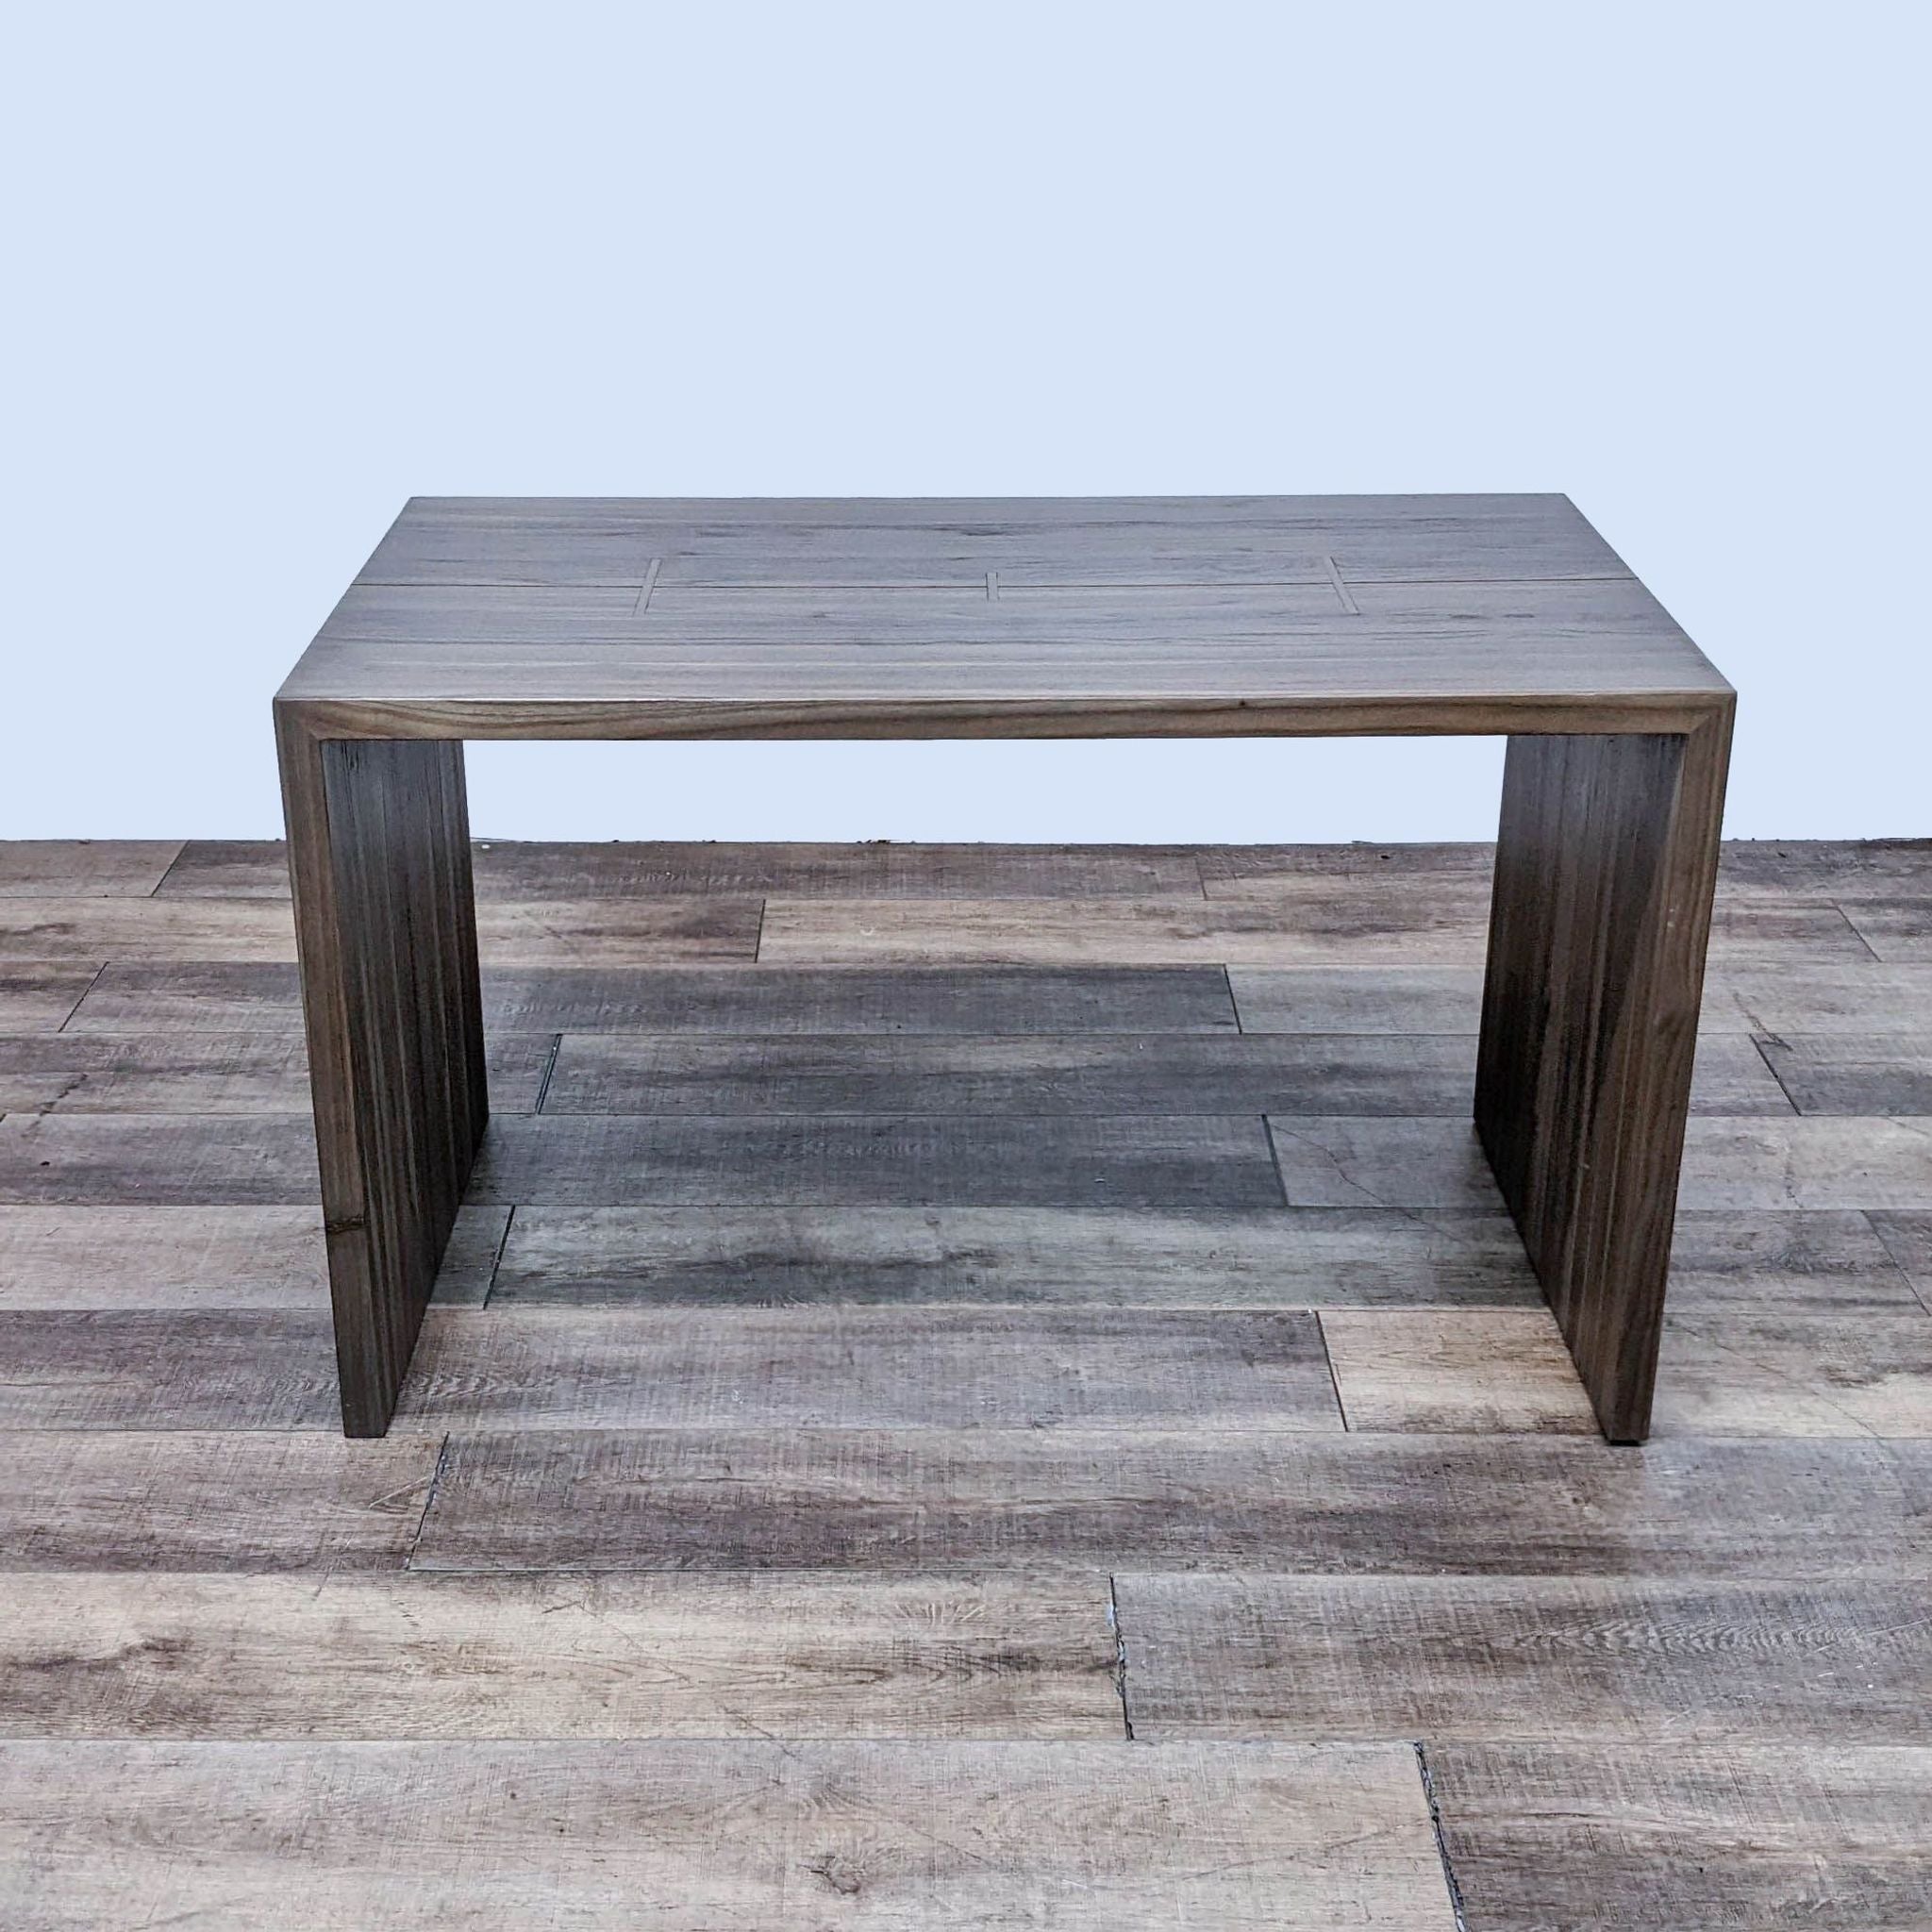 Crate & Barrel's Maxwell Waterfall dining table featuring elm wood planks with brass inlay on a wood floor.